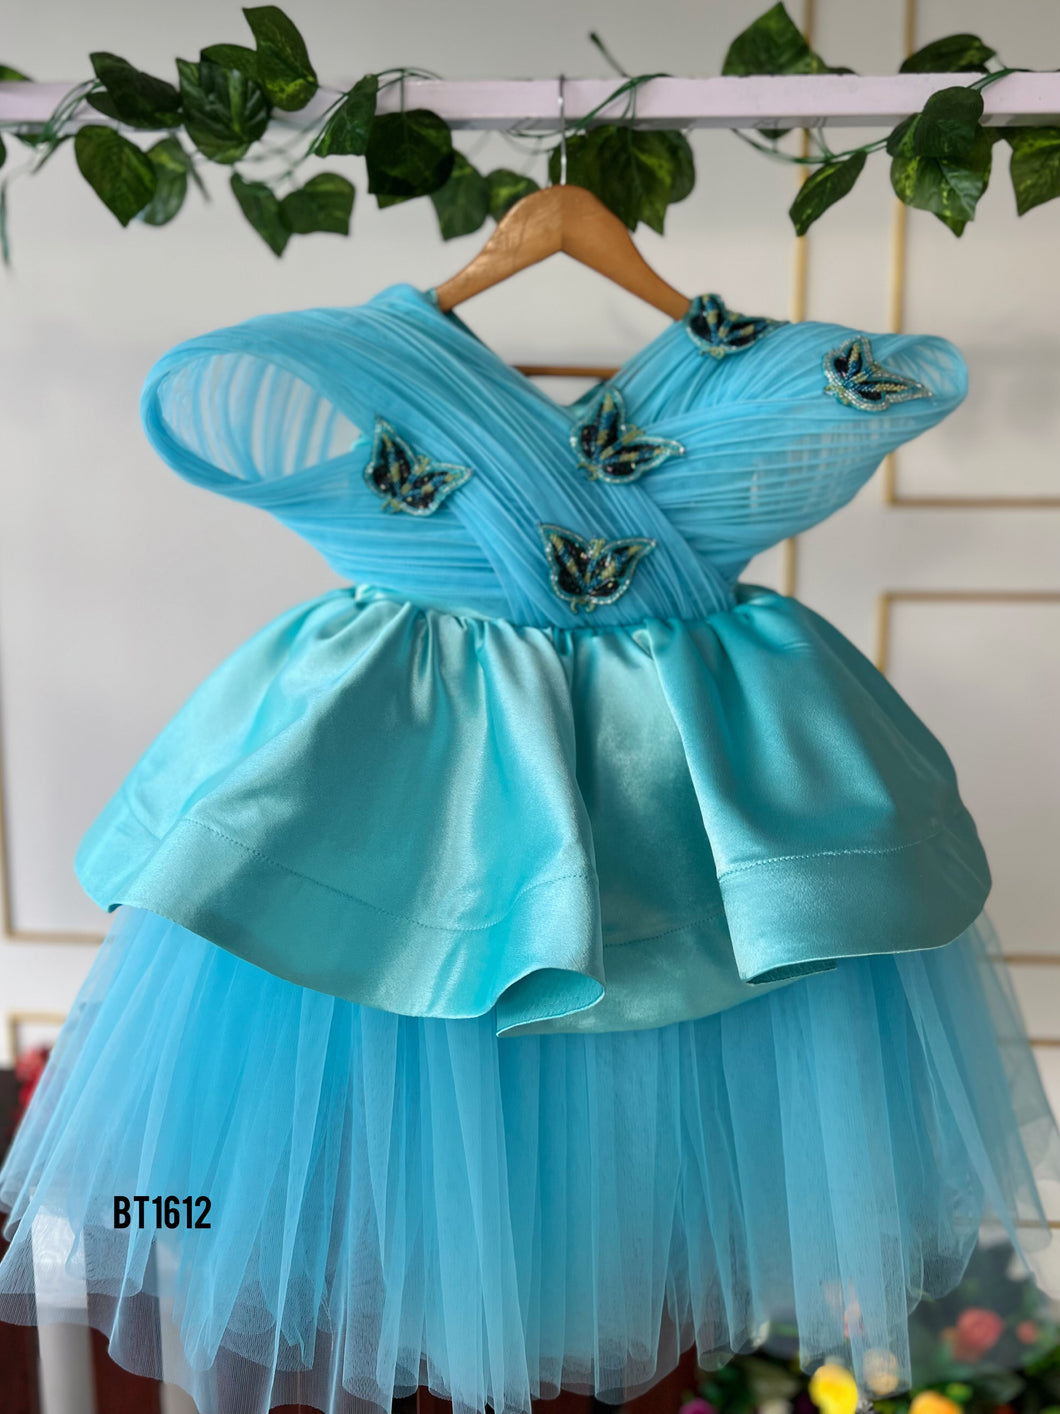 BT1612 Aqua Elegance: Enchanting Butterfly Gown for Tiny Trendsetters